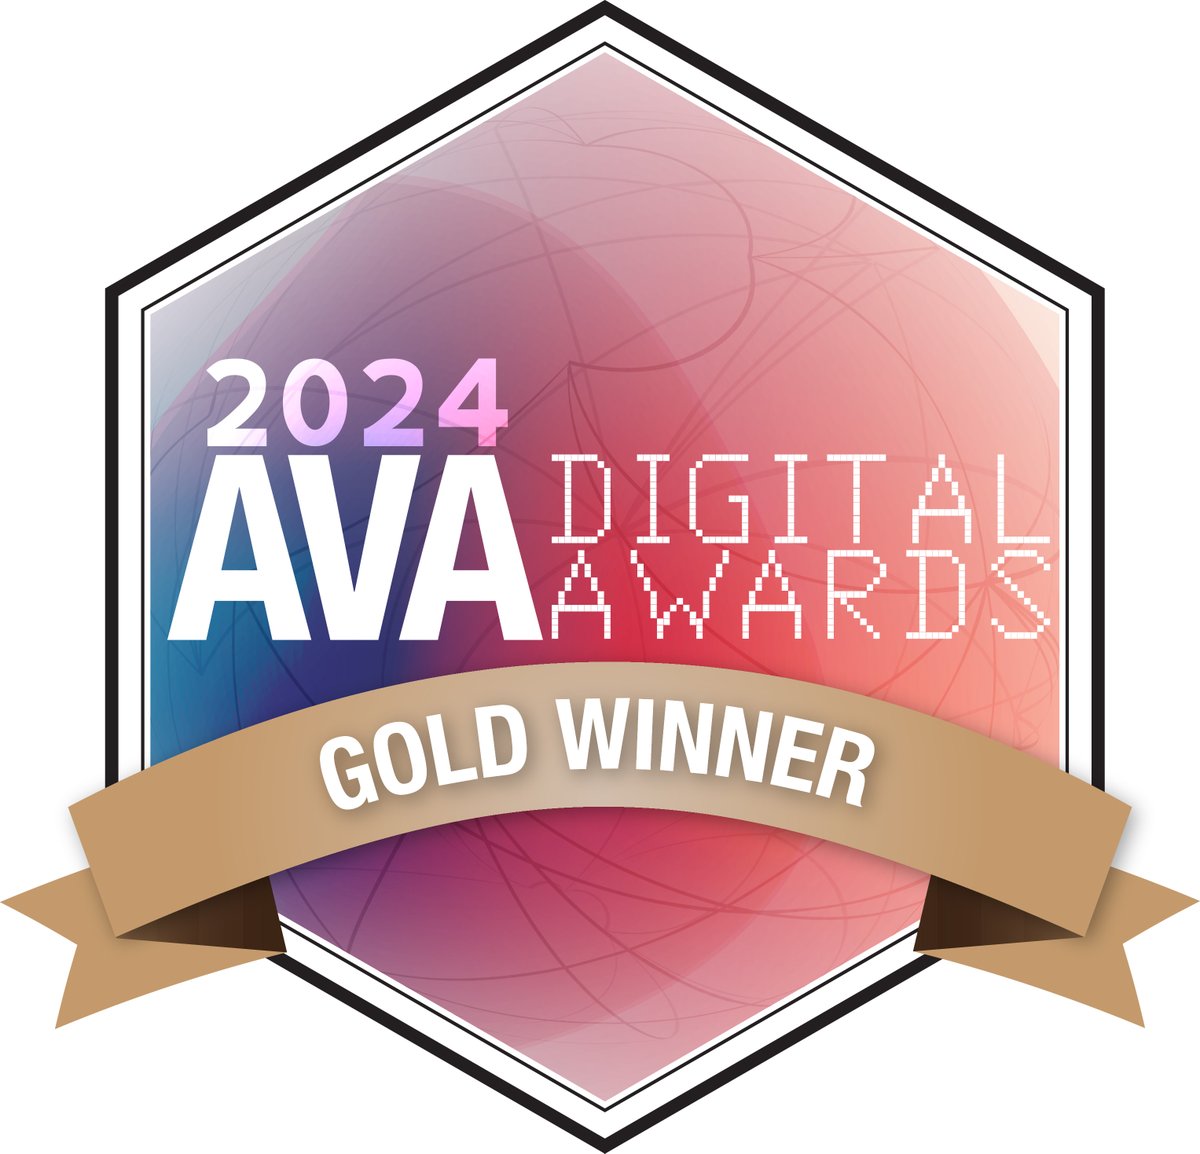 We are pleased to announce two AVA Digital Gold awards from the Association of Marketing and Communication Professionals (AMCP) for “Design and Engineering of the Helix Brand Website” in both technical build and creativity. Check it out here: bit.ly/3T8GJx7 #popgenomics